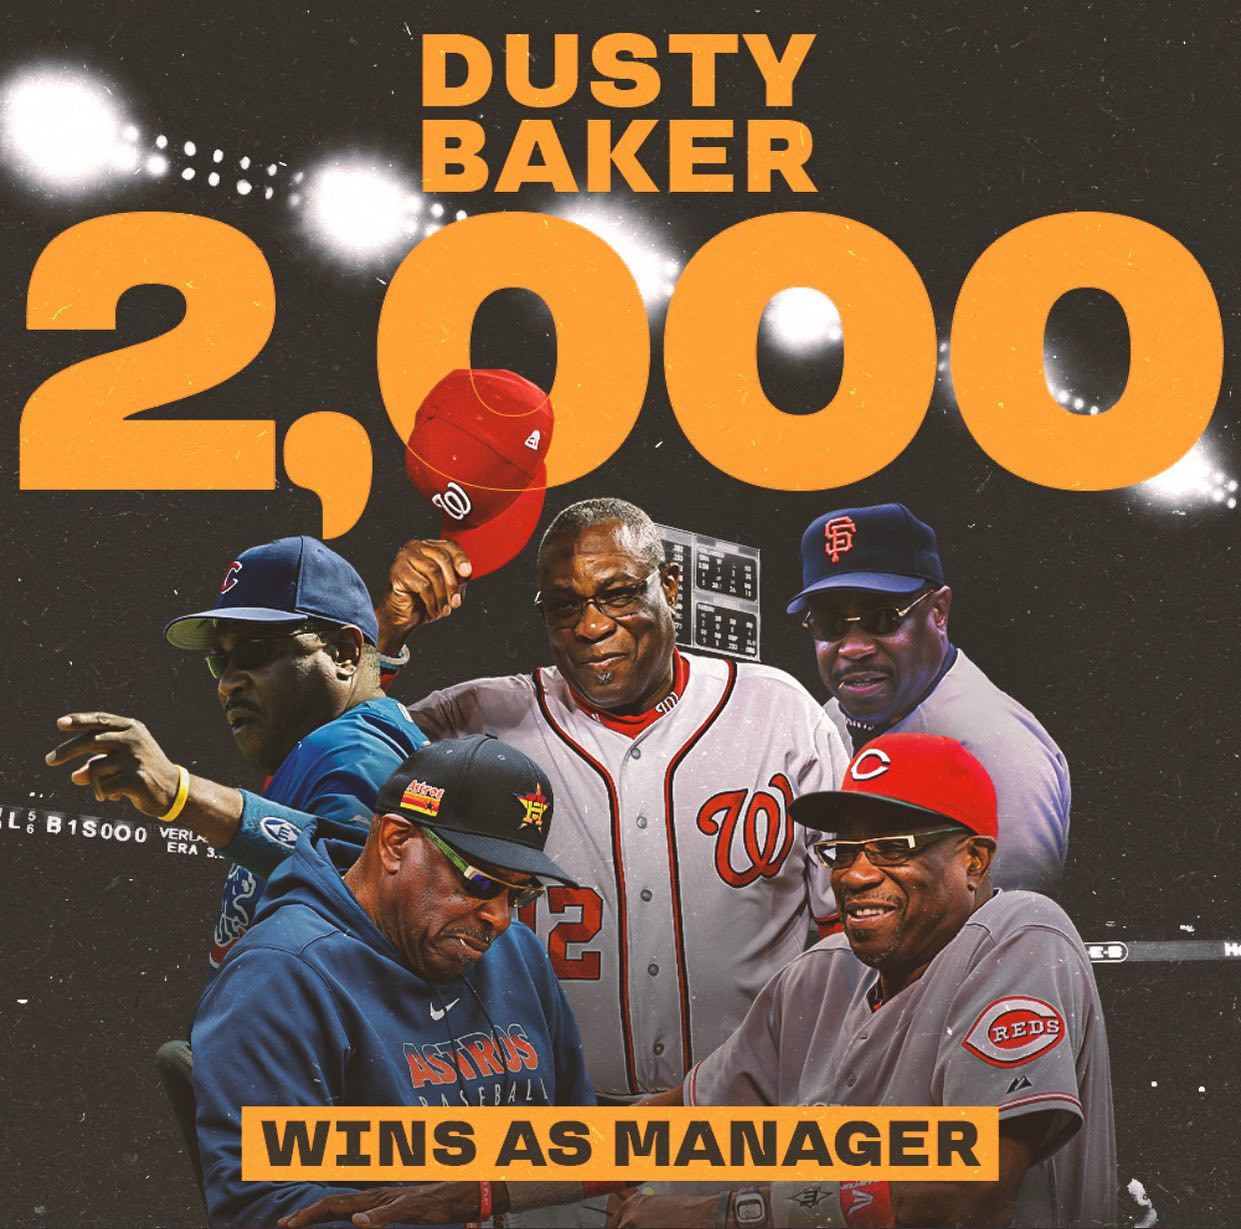 Congratulations to my man Dusty Baker on his 2000th win as a MLB manager. An incredible accomplishment that just punched his ticket into Cooperstown.
.
.
.
.
.
.
.
.
.
#dustybaker #mlb #manager #hof #goat #halloffame #cooperstown #congratulations